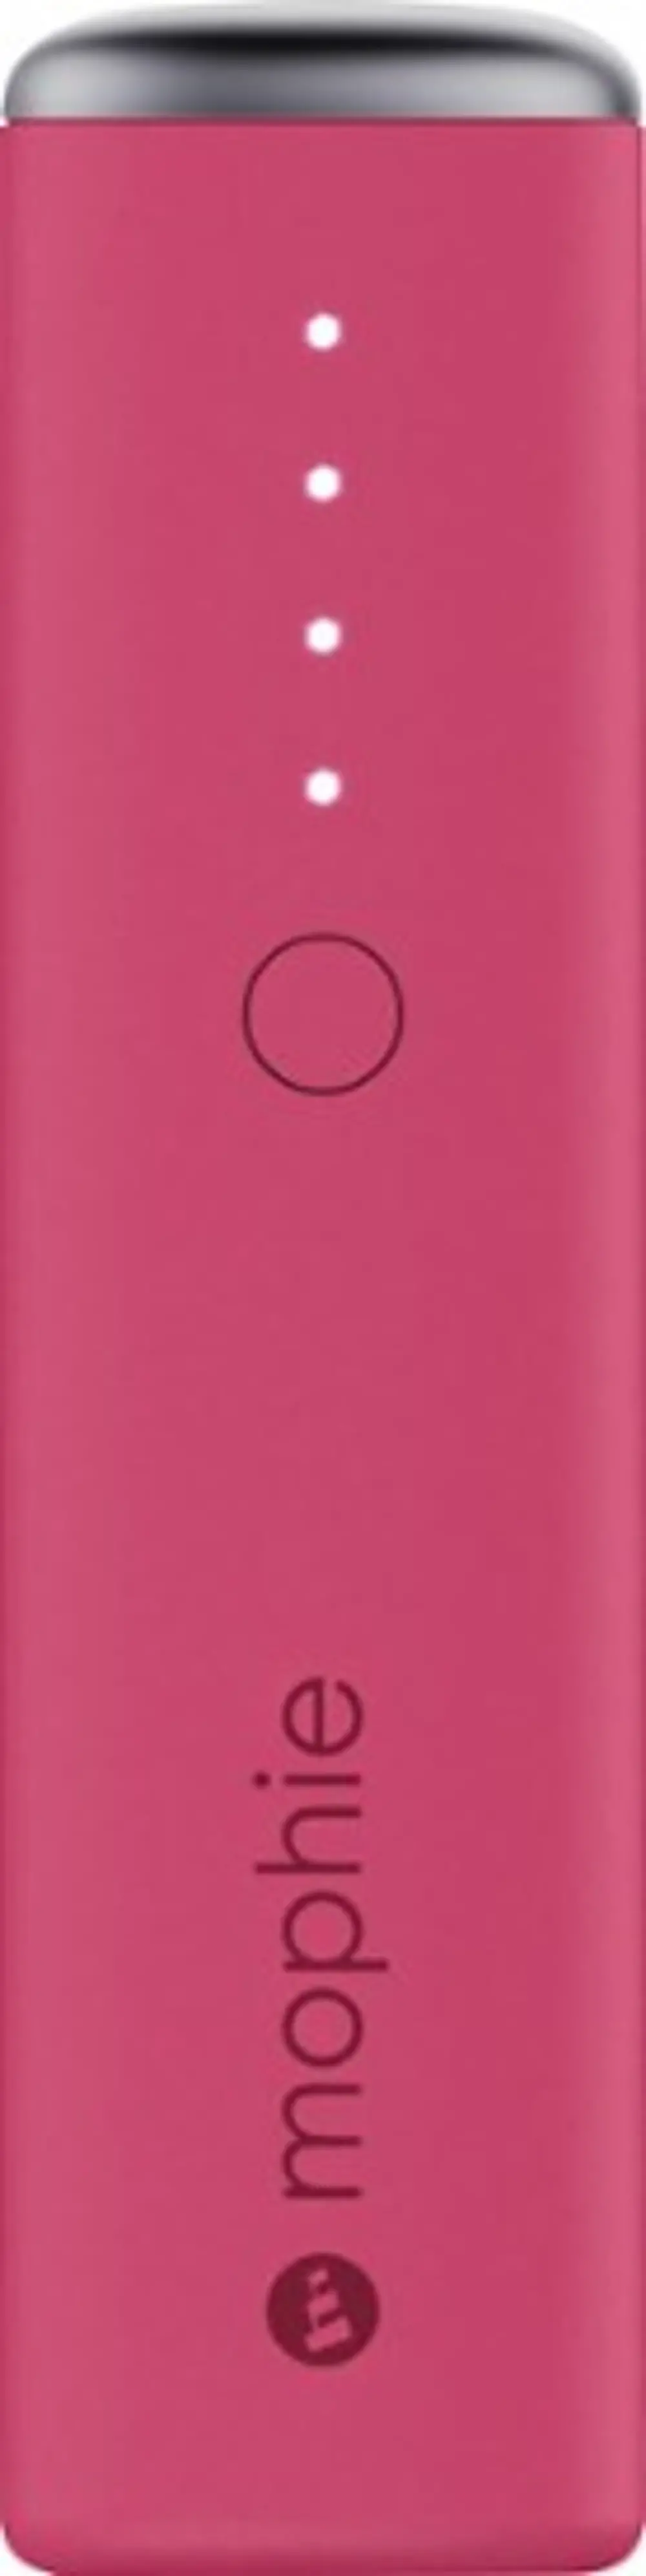 3352_PWR-RESERVE-2.6K-PNK Mophie Power Reserve 1X (2,600mAh) - Pink-1